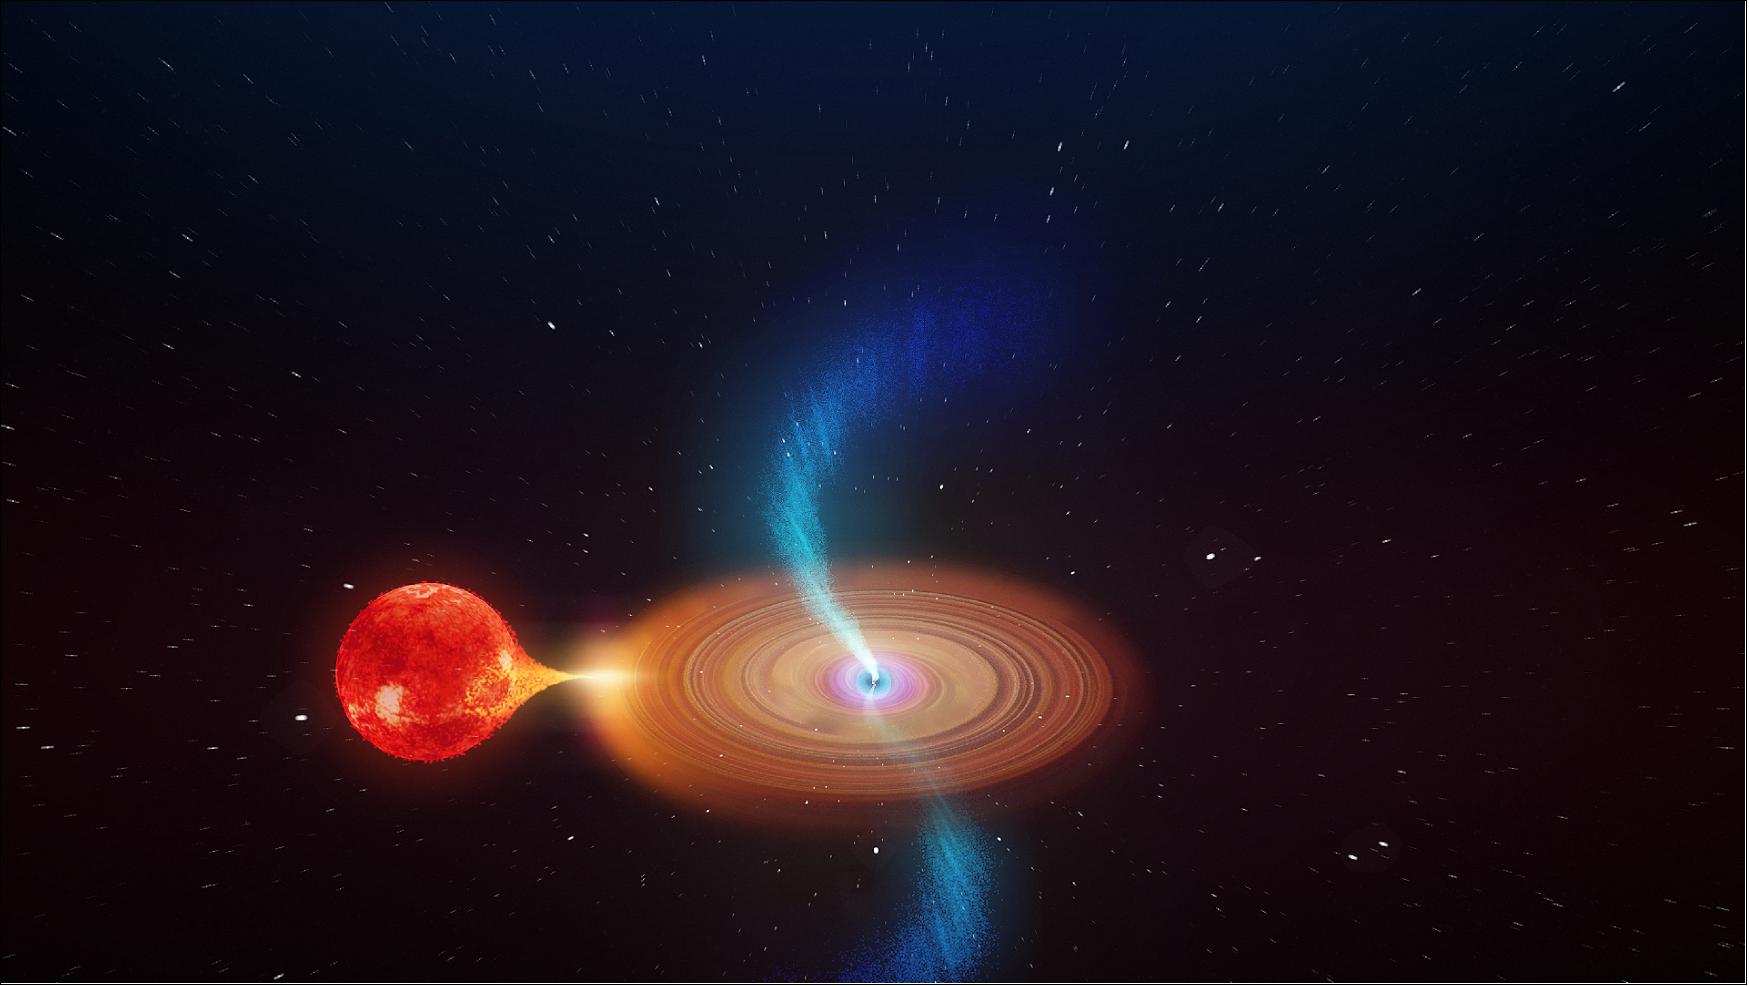 Figure 17: Artist's impression of a black hole accreting material from a companion star. Data from ESA’s Integral high-energy observatory have helped shed light on the workings of a mysterious black hole found spitting out ‘bullets’ of plasma while rotating through space (image credit: ICRAR)